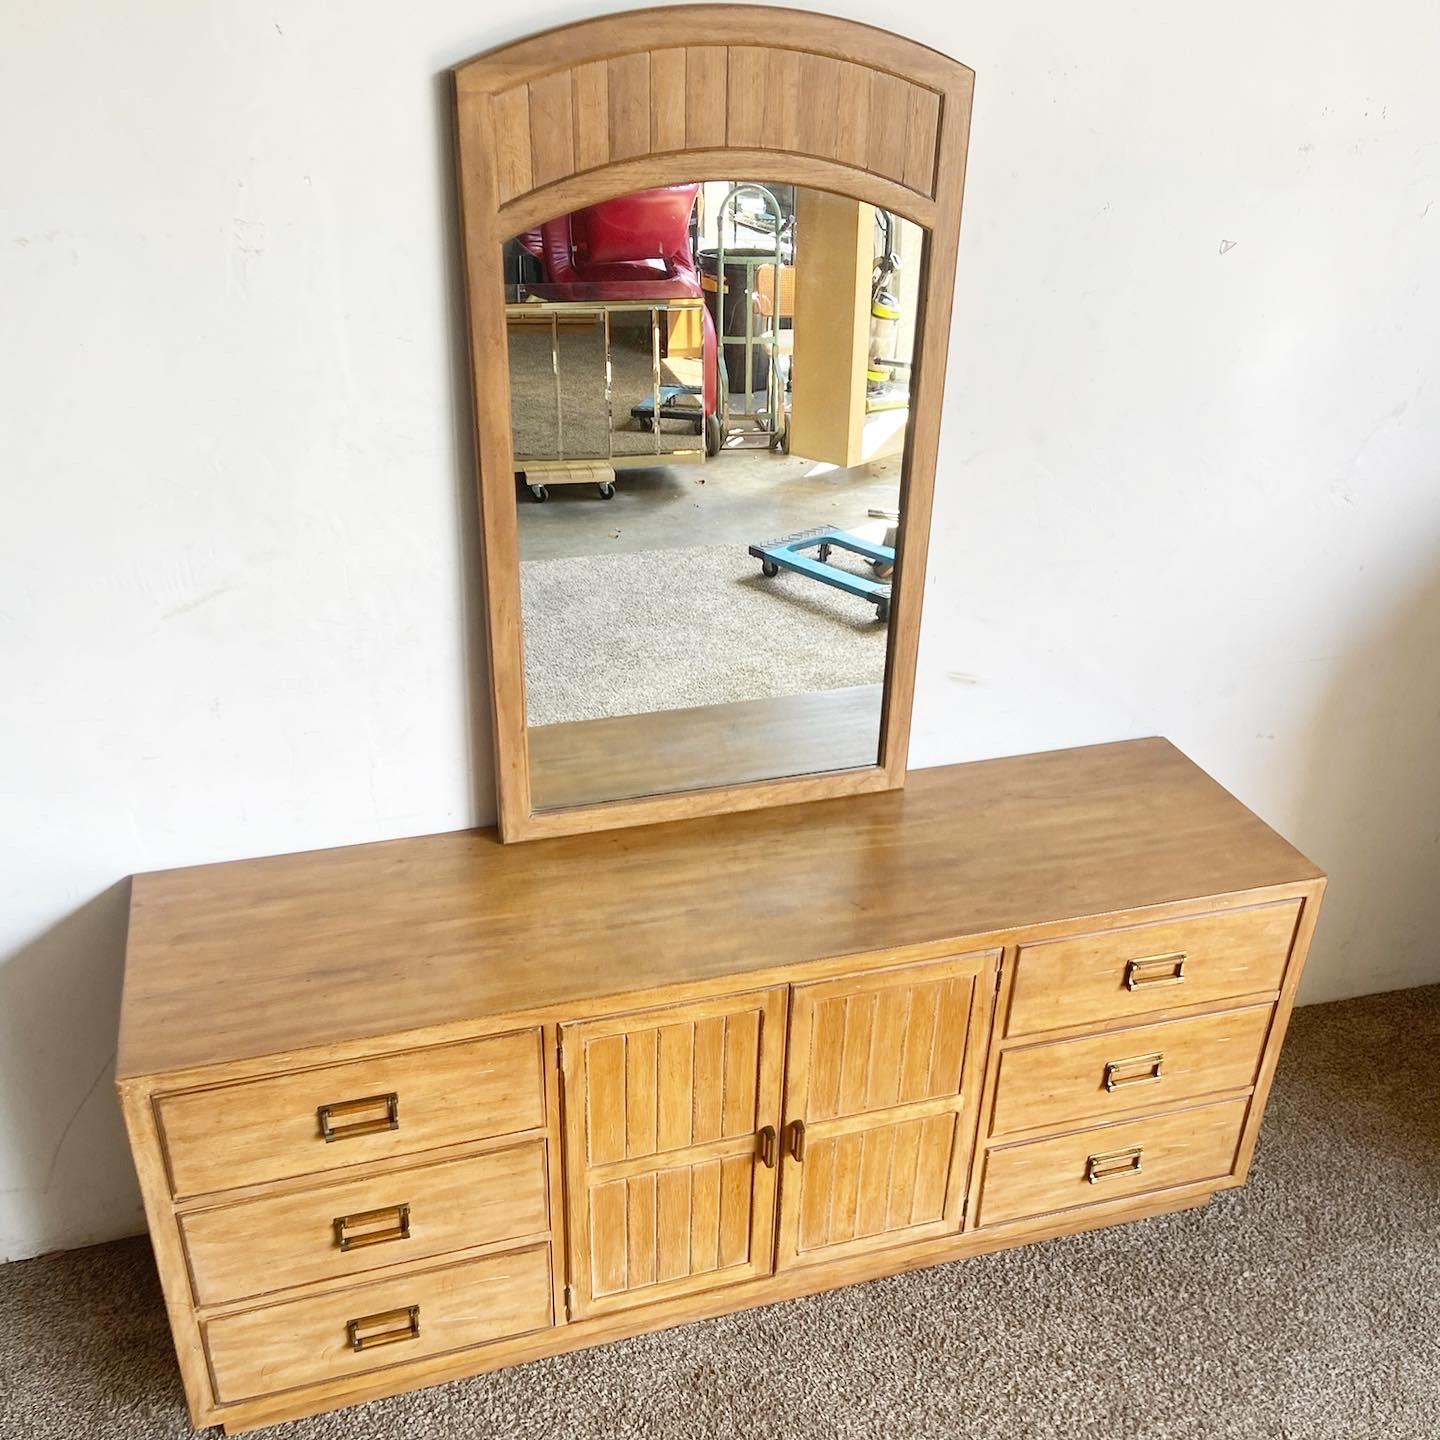 Elevate your bedroom with the Mid-Century Drexel Dresser Set. This two-piece ensemble by Drexel Furniture combines vintage elegance with functional design, featuring nine drawers and a matching mirror.
Minor wear around the edges as seen in the